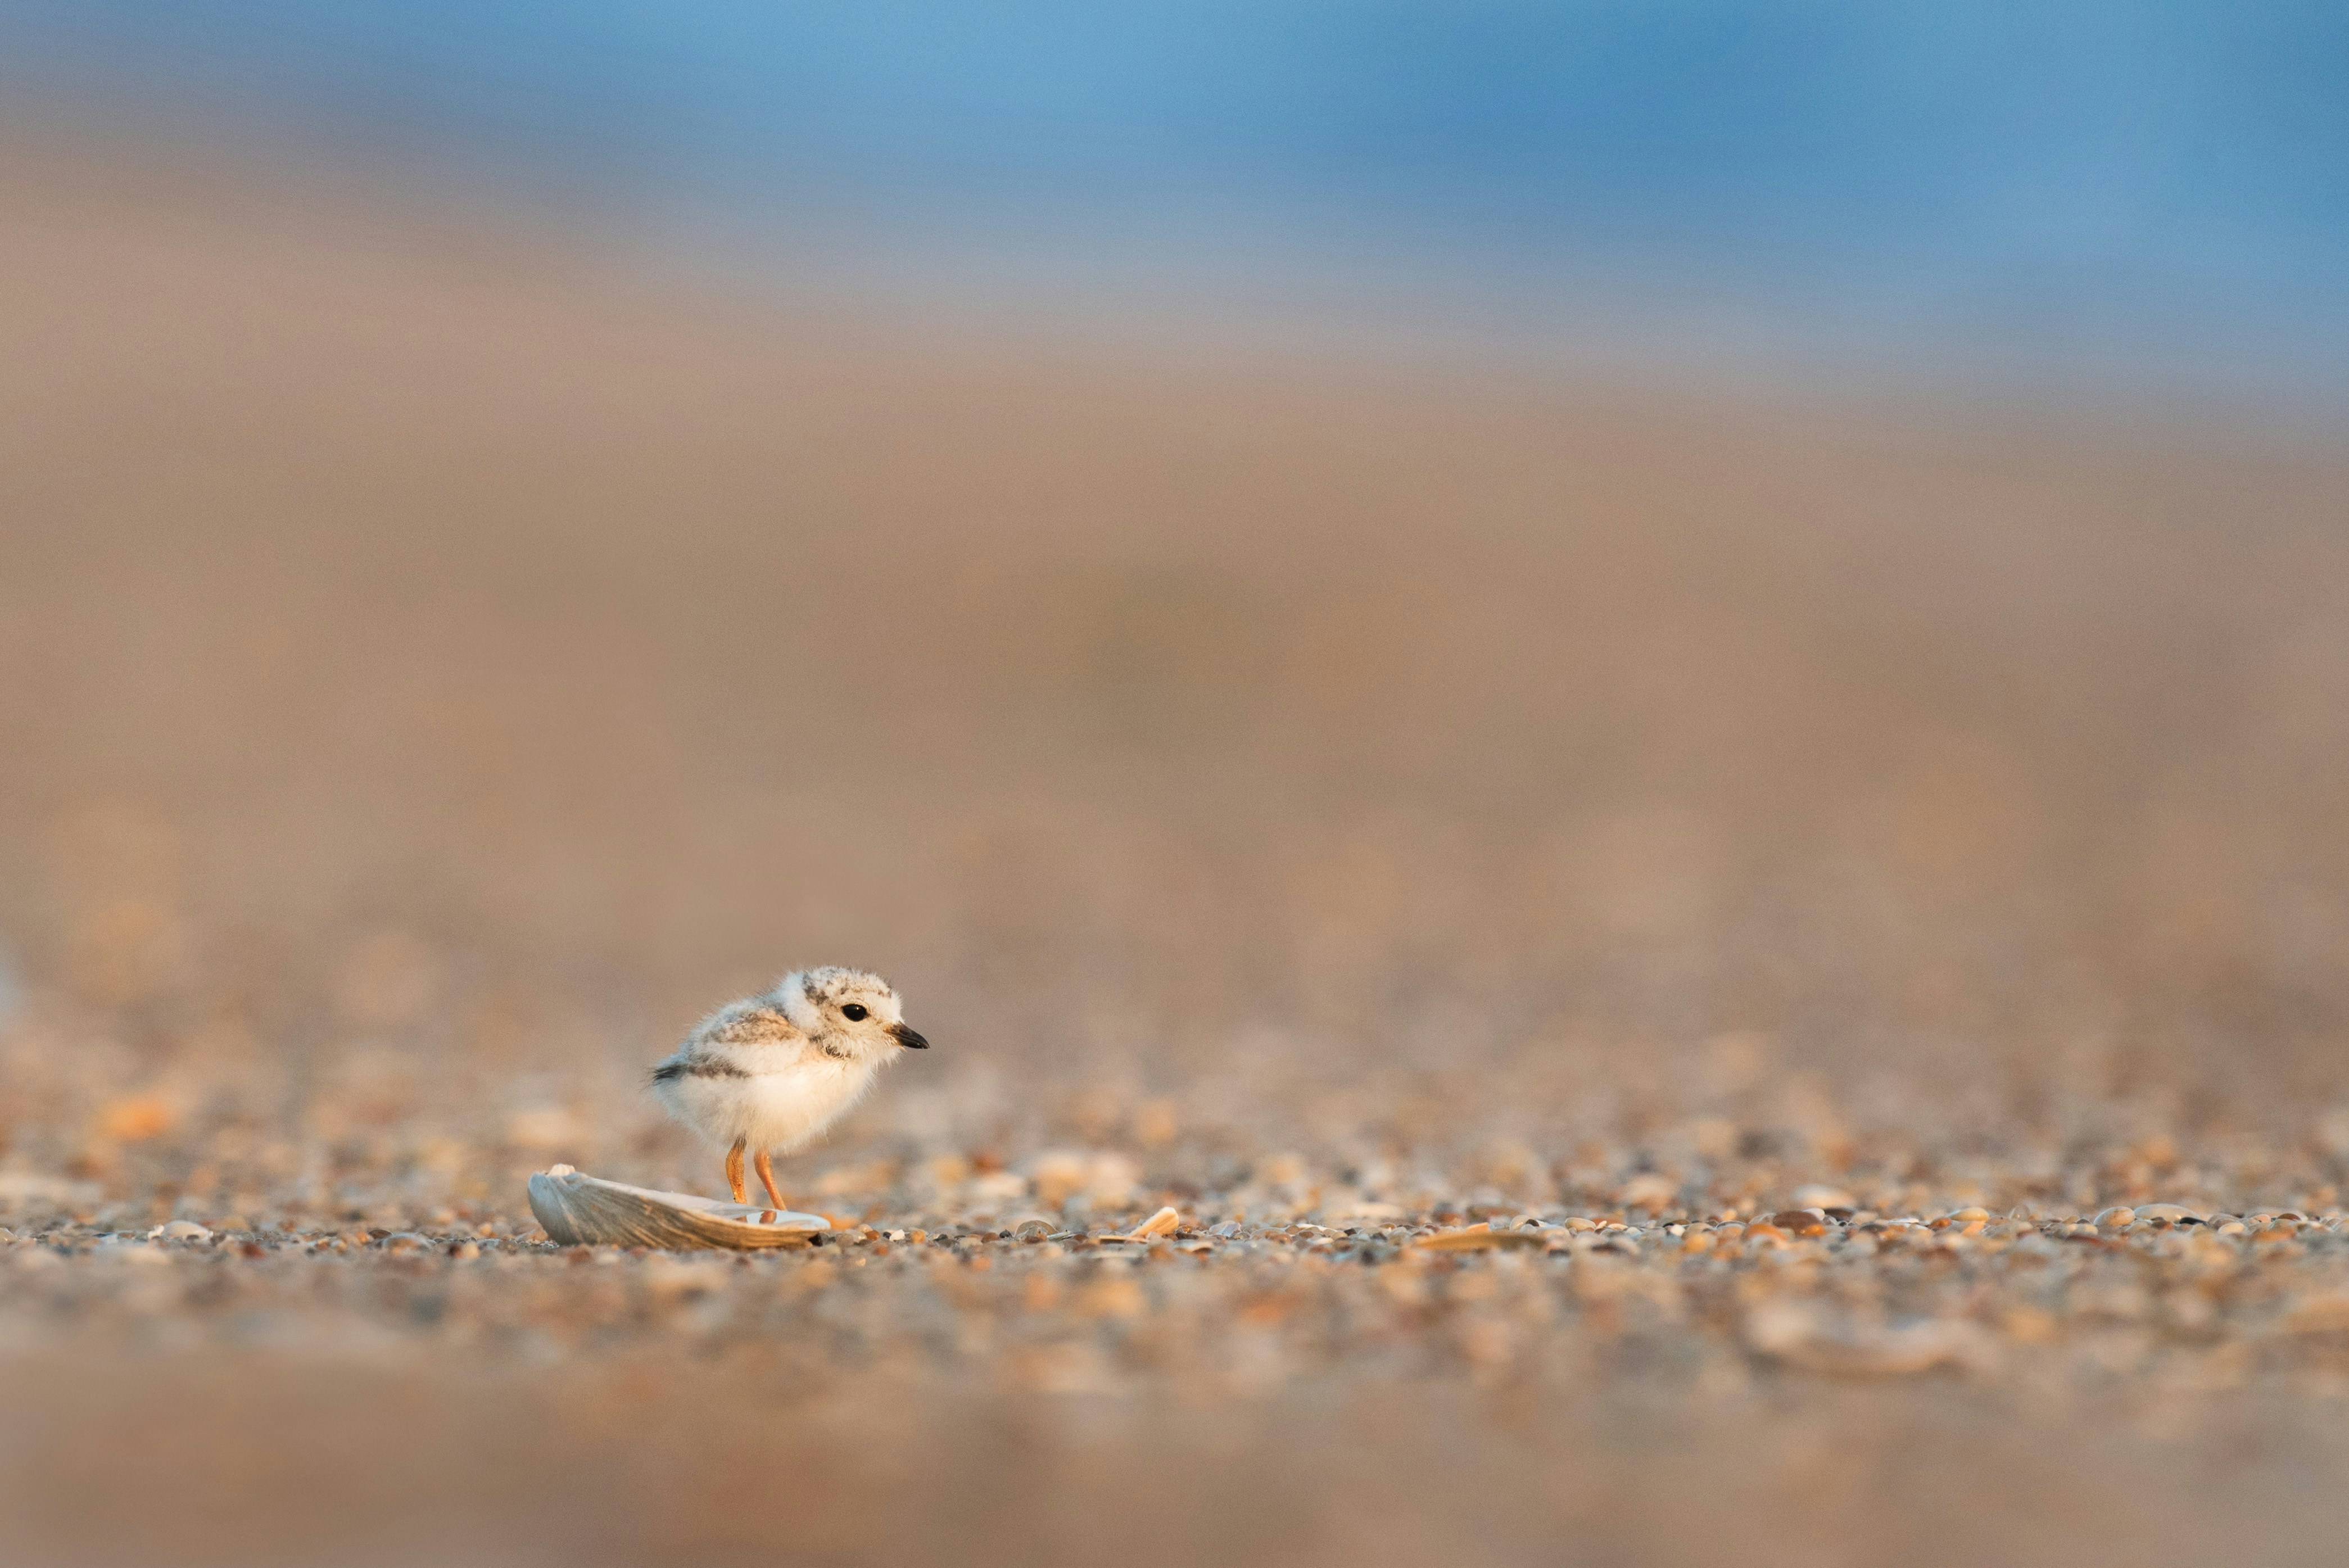 A very tiny and incredibly adorable Piping Plover chick stands right behind a small shell on the beach as if it is somehow hidden behind it. I like that the shell has a tiny bit of water in it that reflects the chick’s orange legs. The soft sun had just started to break through a cloud bank that hung at the horizon so the morning light is just right. Taken along the northern New Jersey coast in early June.